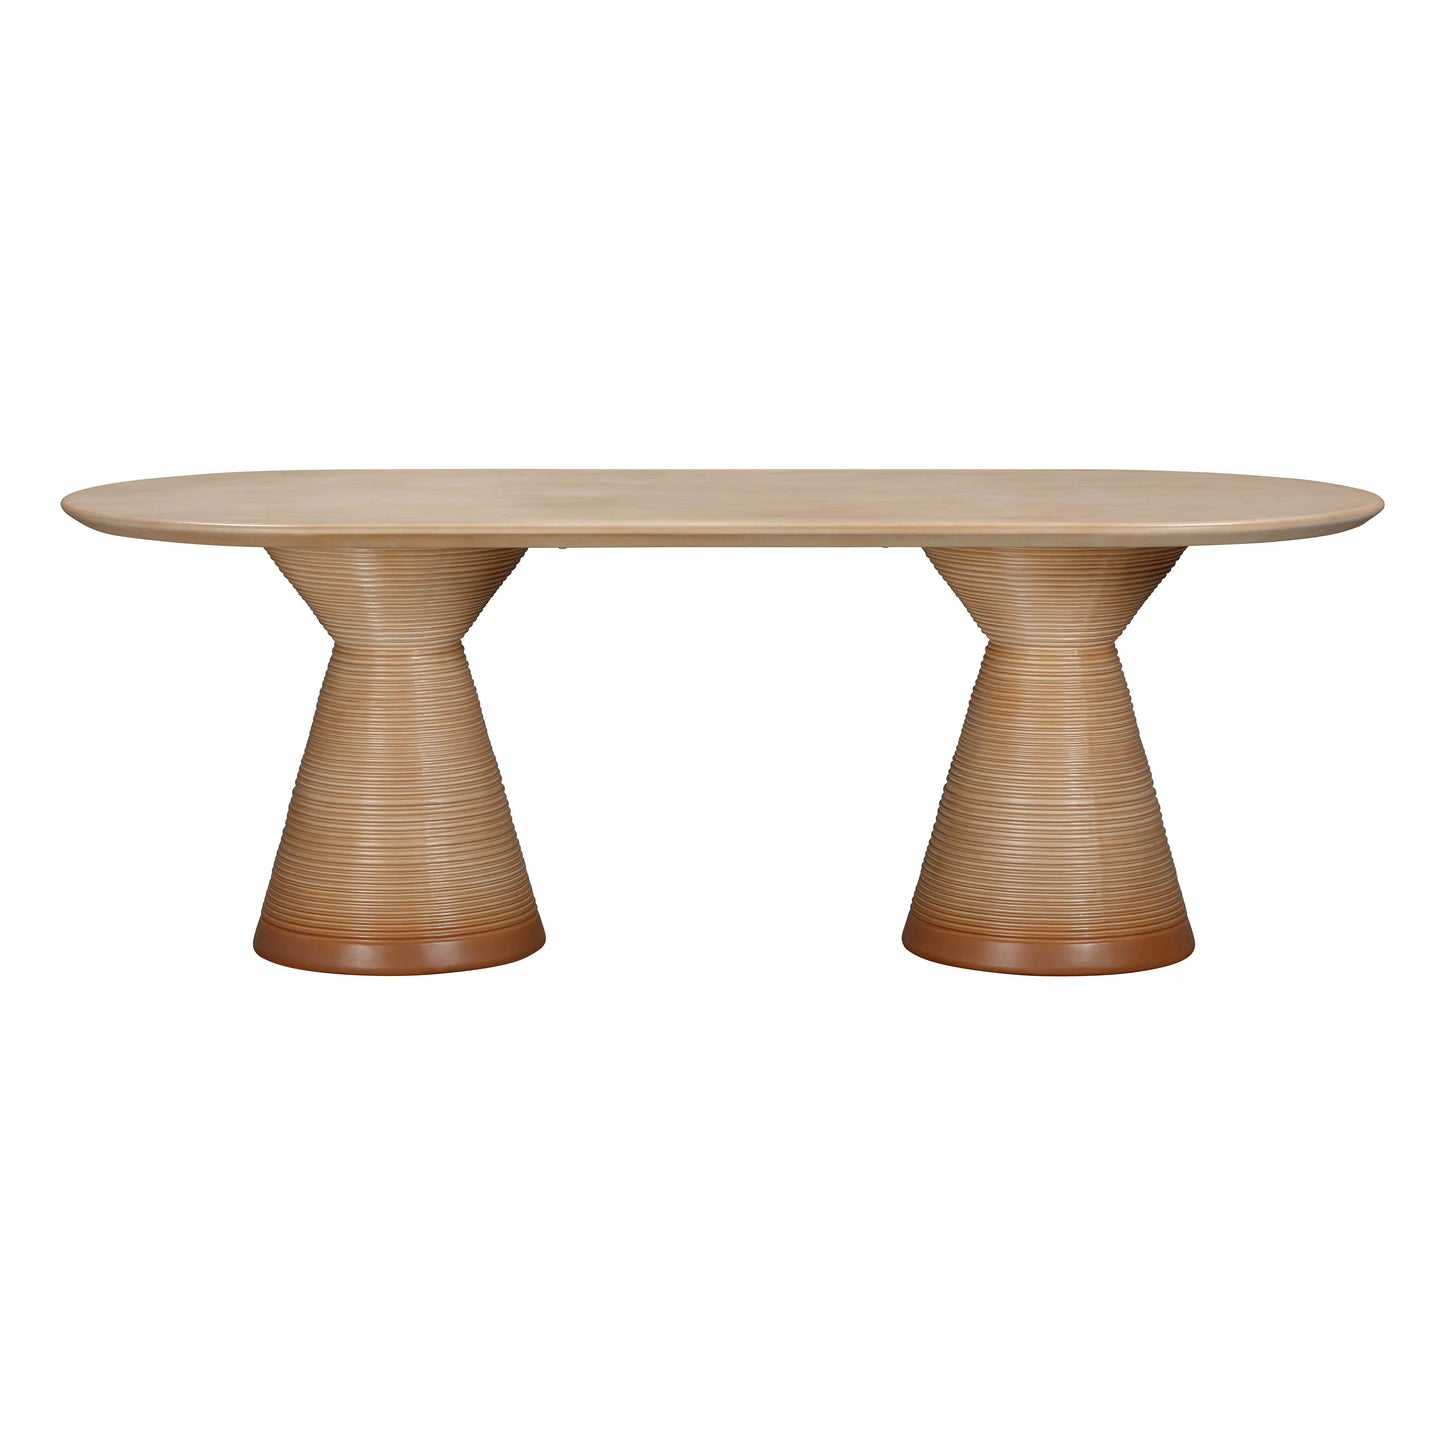 chip terracotta oval indoor / outdoor dining table